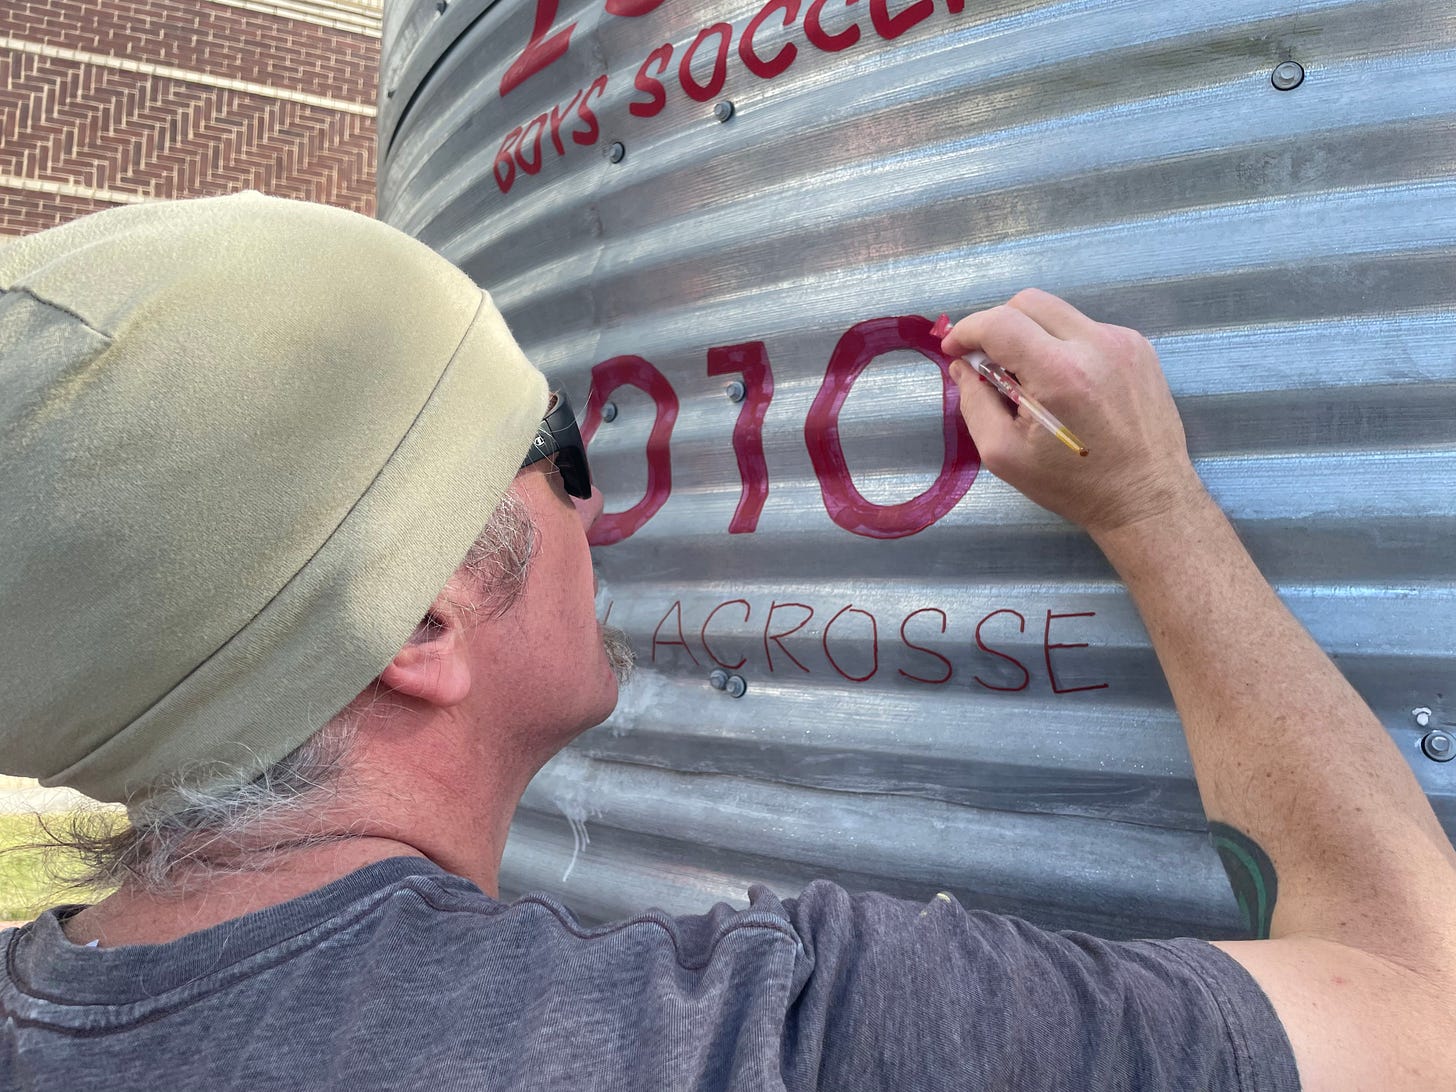 A man painting "2010 BOYS LACROSSE" on a silo